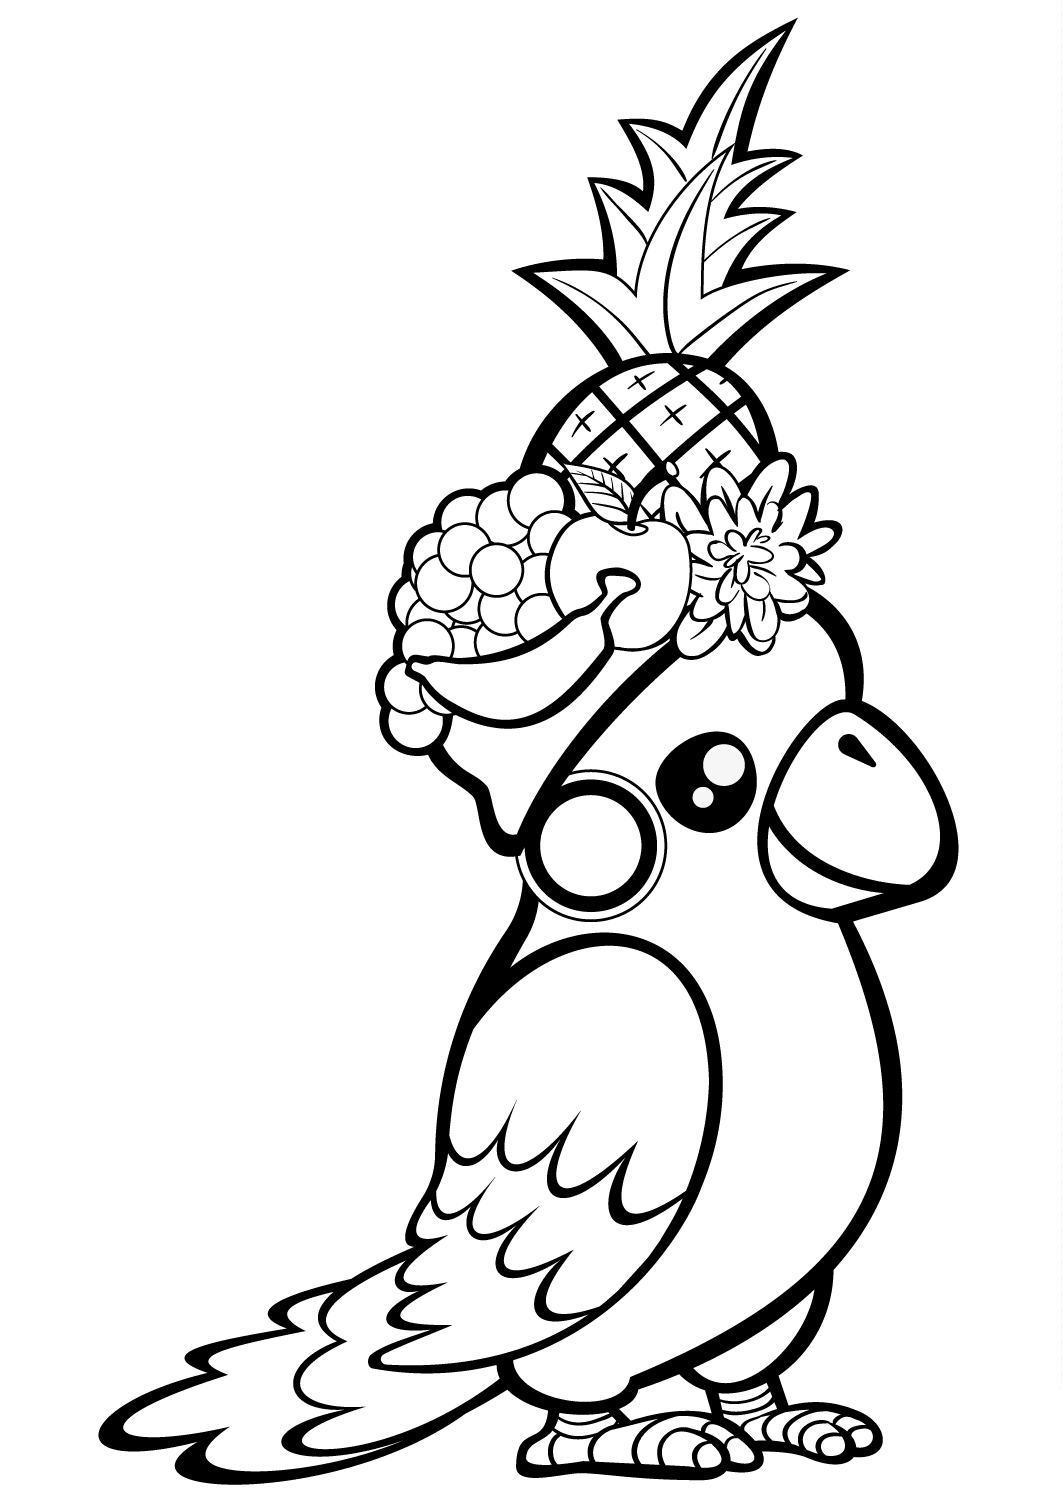 Cute Parrot With Fruit On Its Head